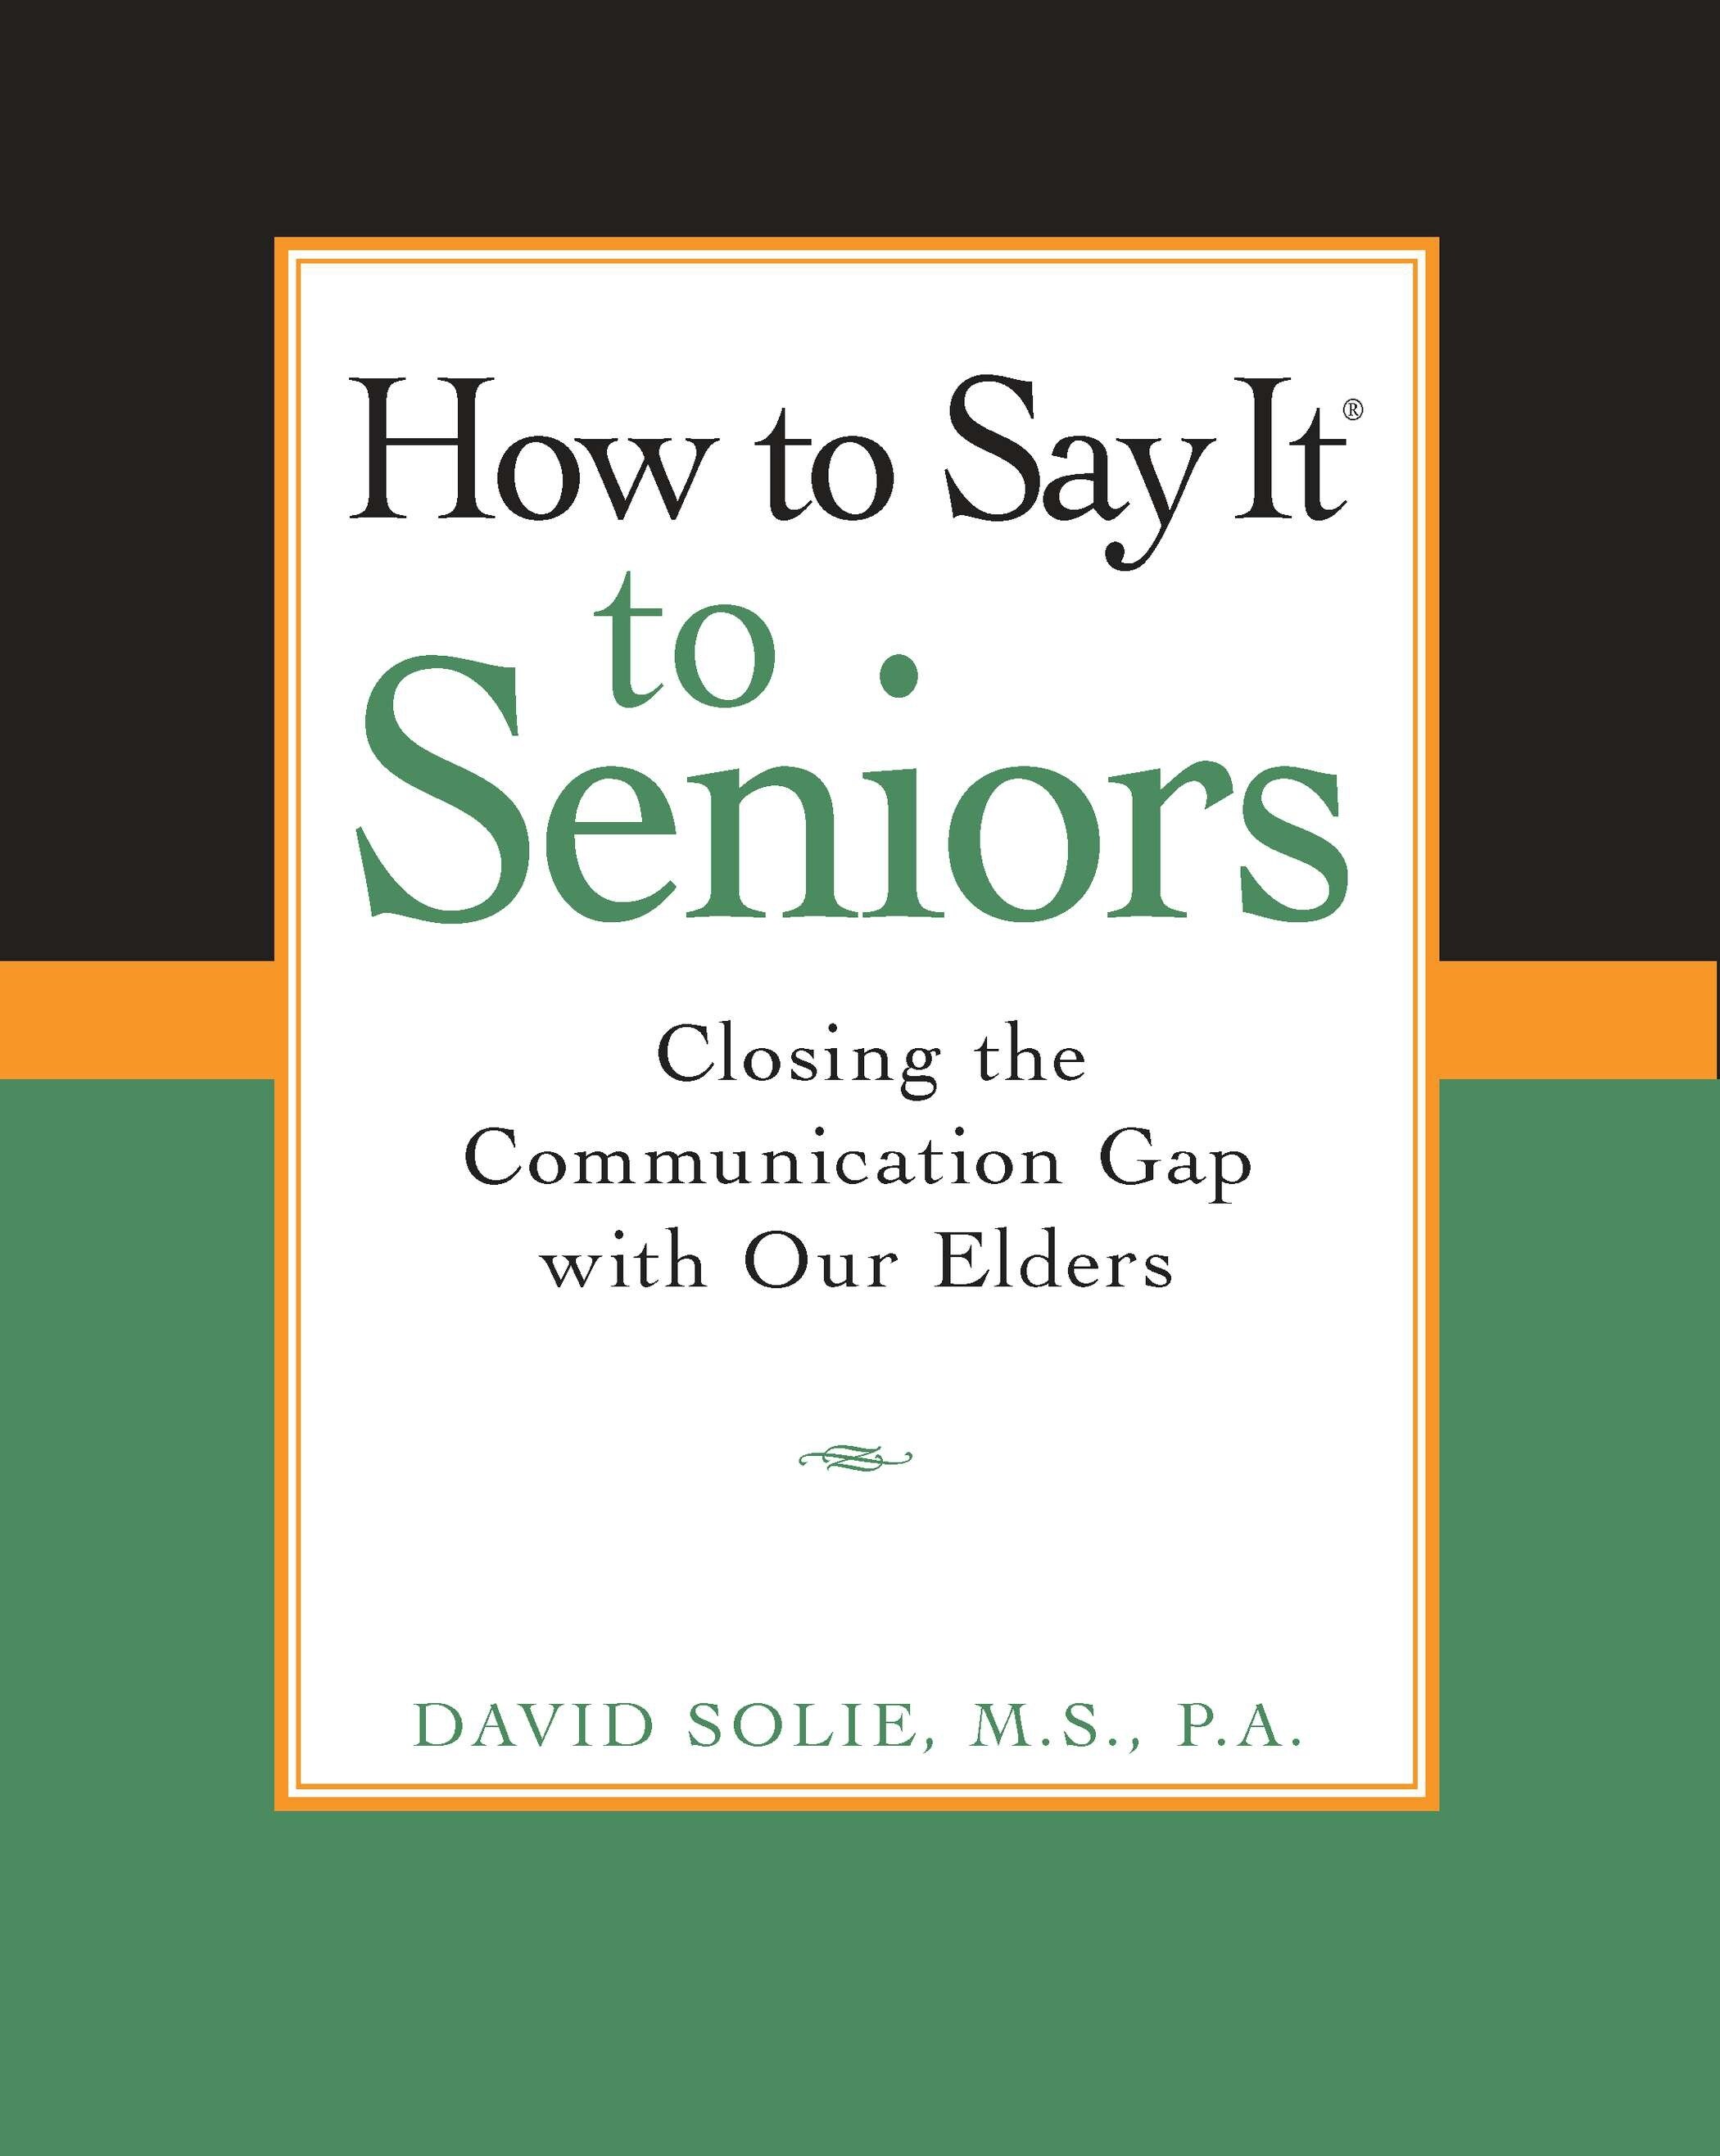 How to Say It(r) to Seniors: Closing the Communication Gap with Our Elders (Paperback)